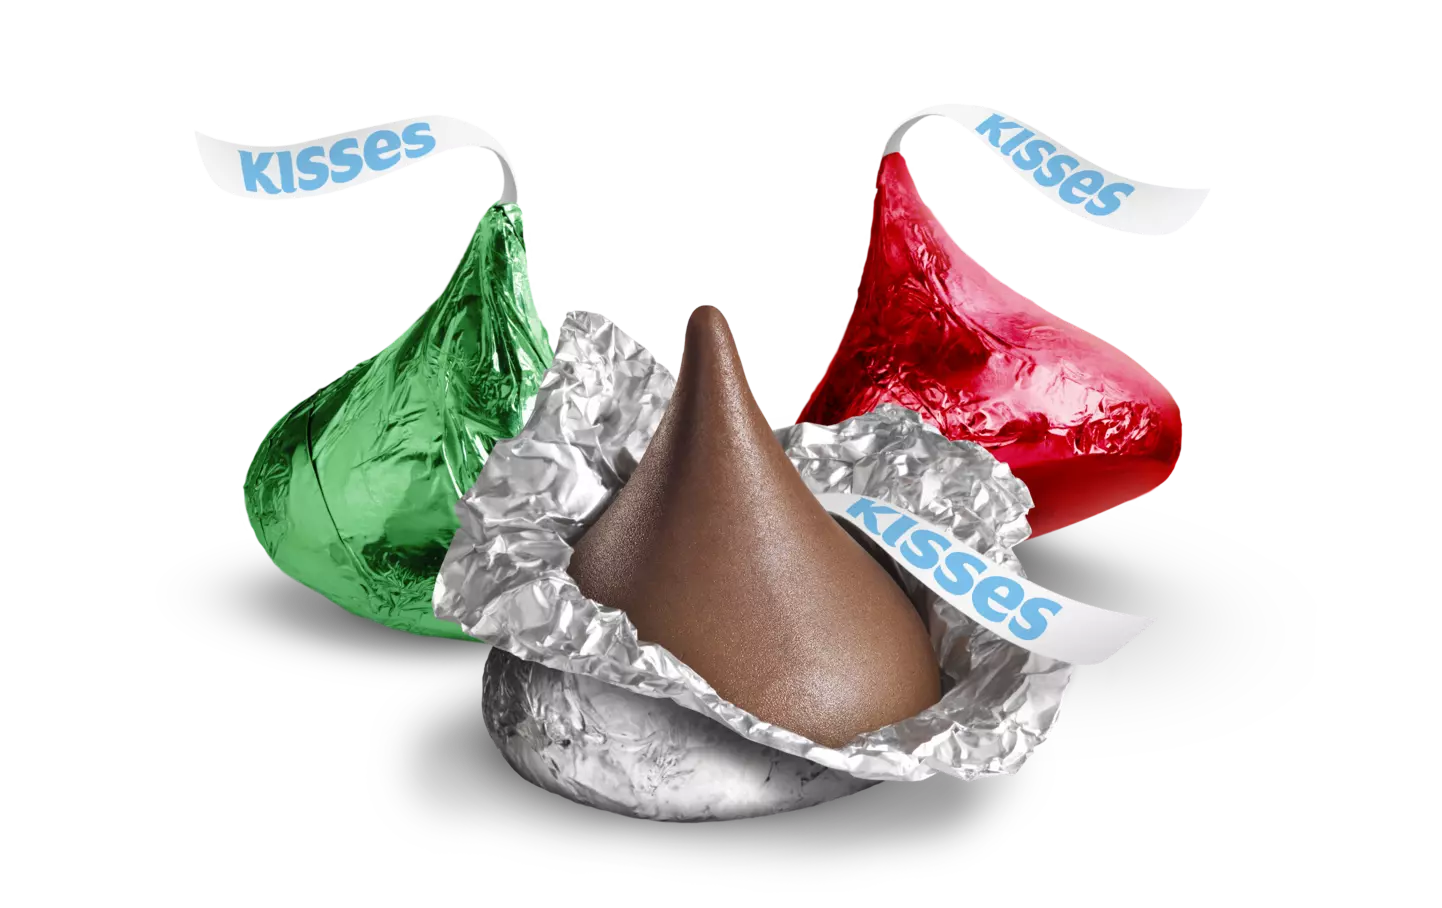 HERSHEY'S KISSES Holiday Milk Chocolate Candy, 17 oz bag - Out of Package